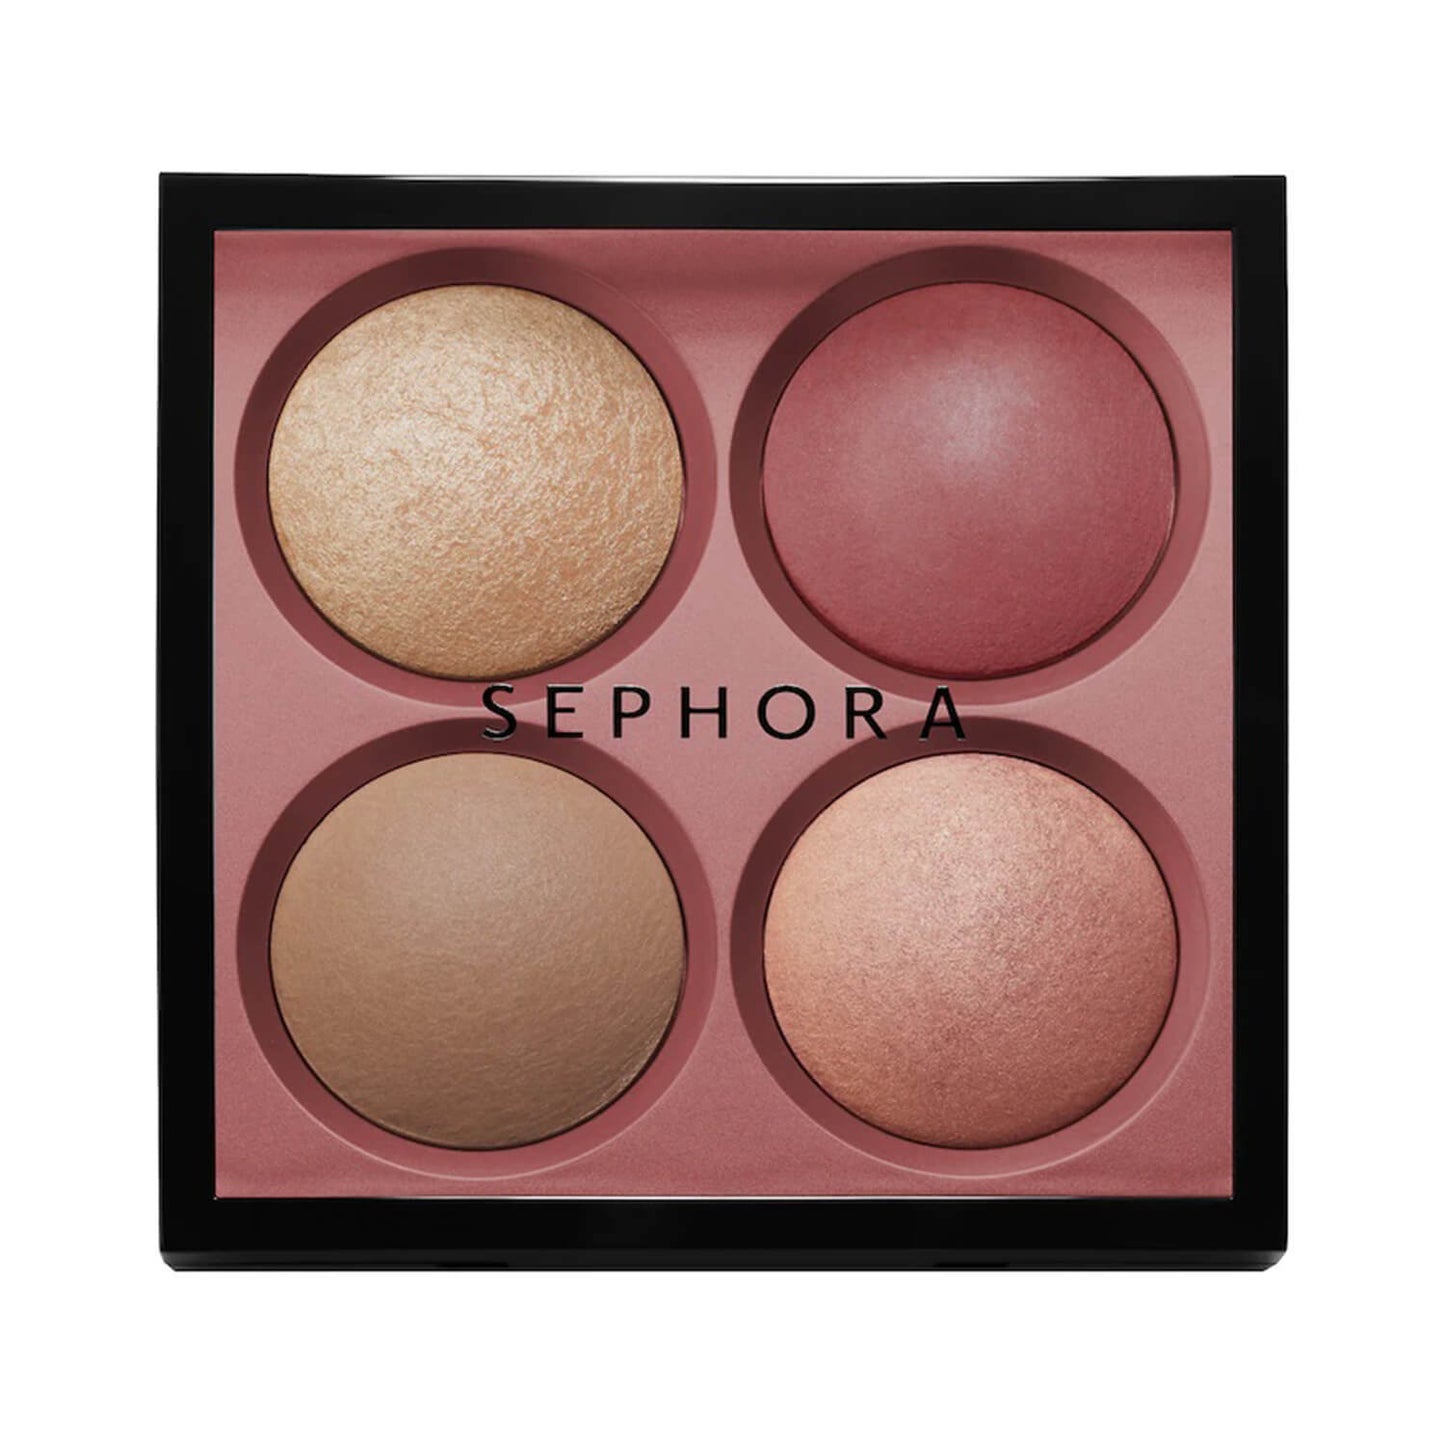 Shop 100% original Sephora Micro smooth Face Makeup Palette in Captivate shade available at Heygirl.pk for delivery in Pakistan.